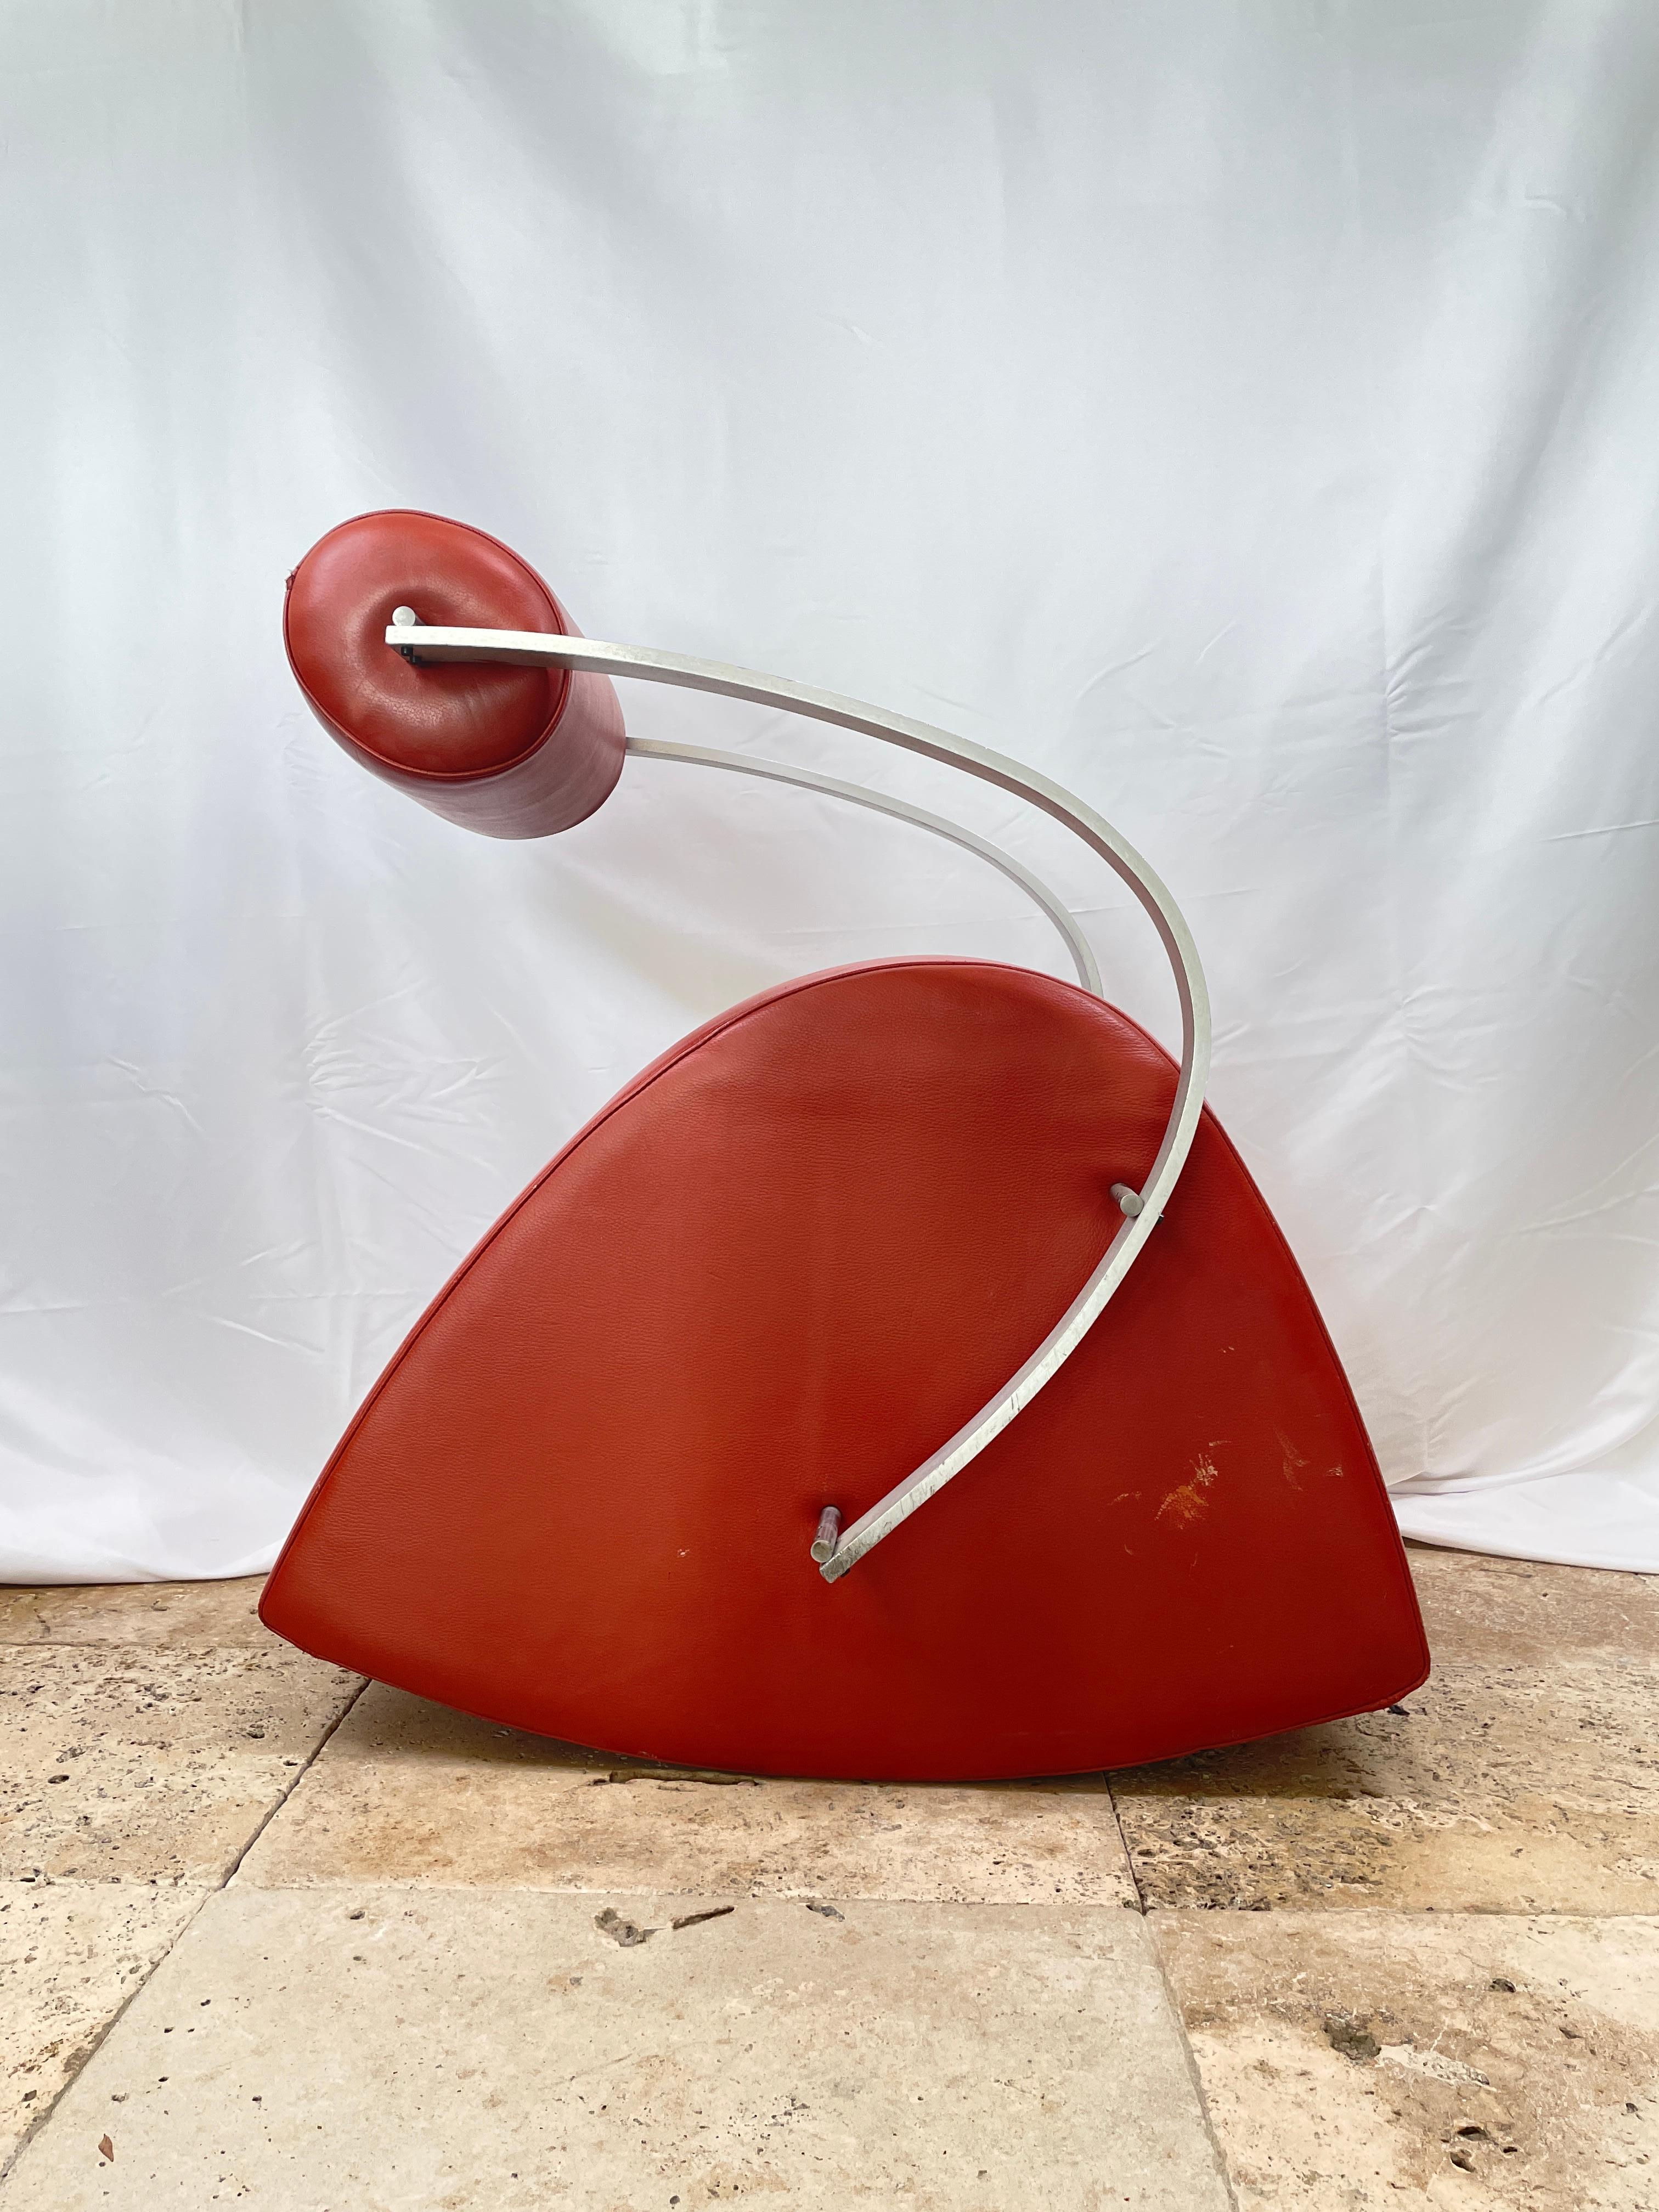 Yves JACCOUD (XX-XXI)
Rocking-chair Vertigo model with thick curved aluminum braces, the seat forming an inverted tilting V. Back in foam-filled collar covered with orange-red leather.

Slight trace of use on the back.
Edition: Few copies,